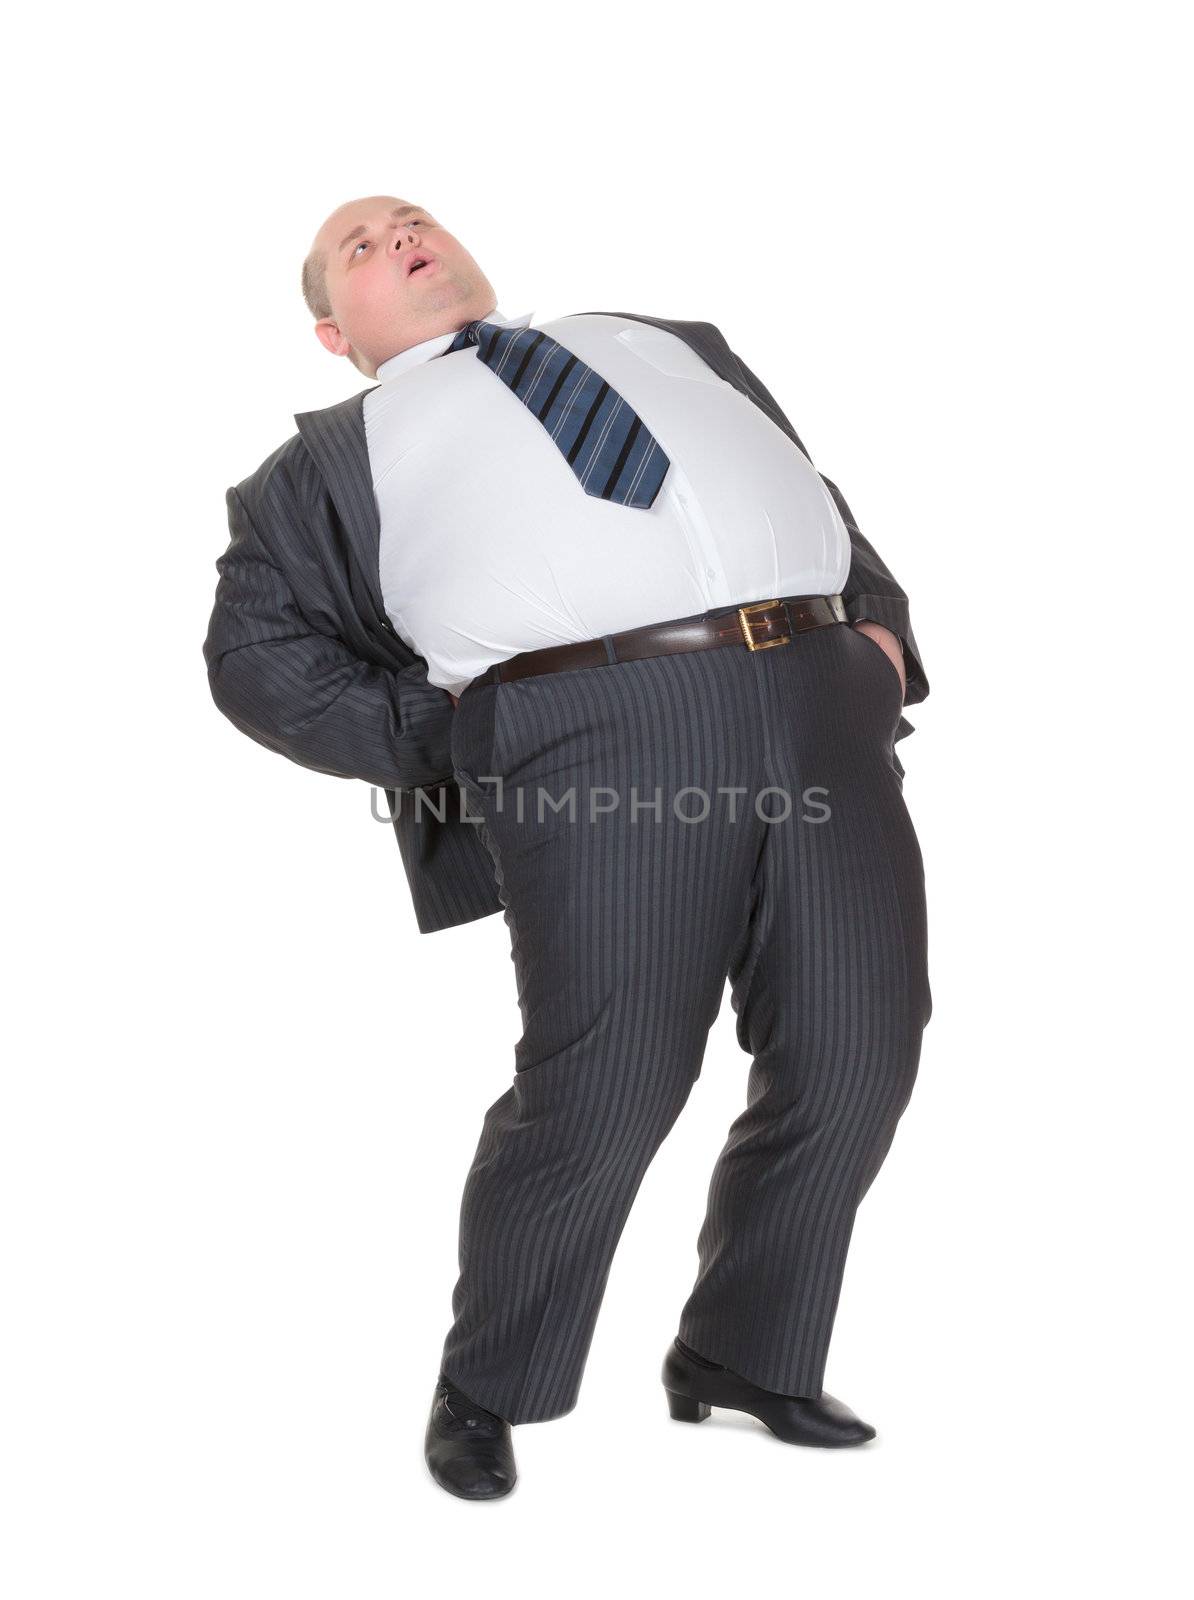 Overweight man with back pain by Discovod